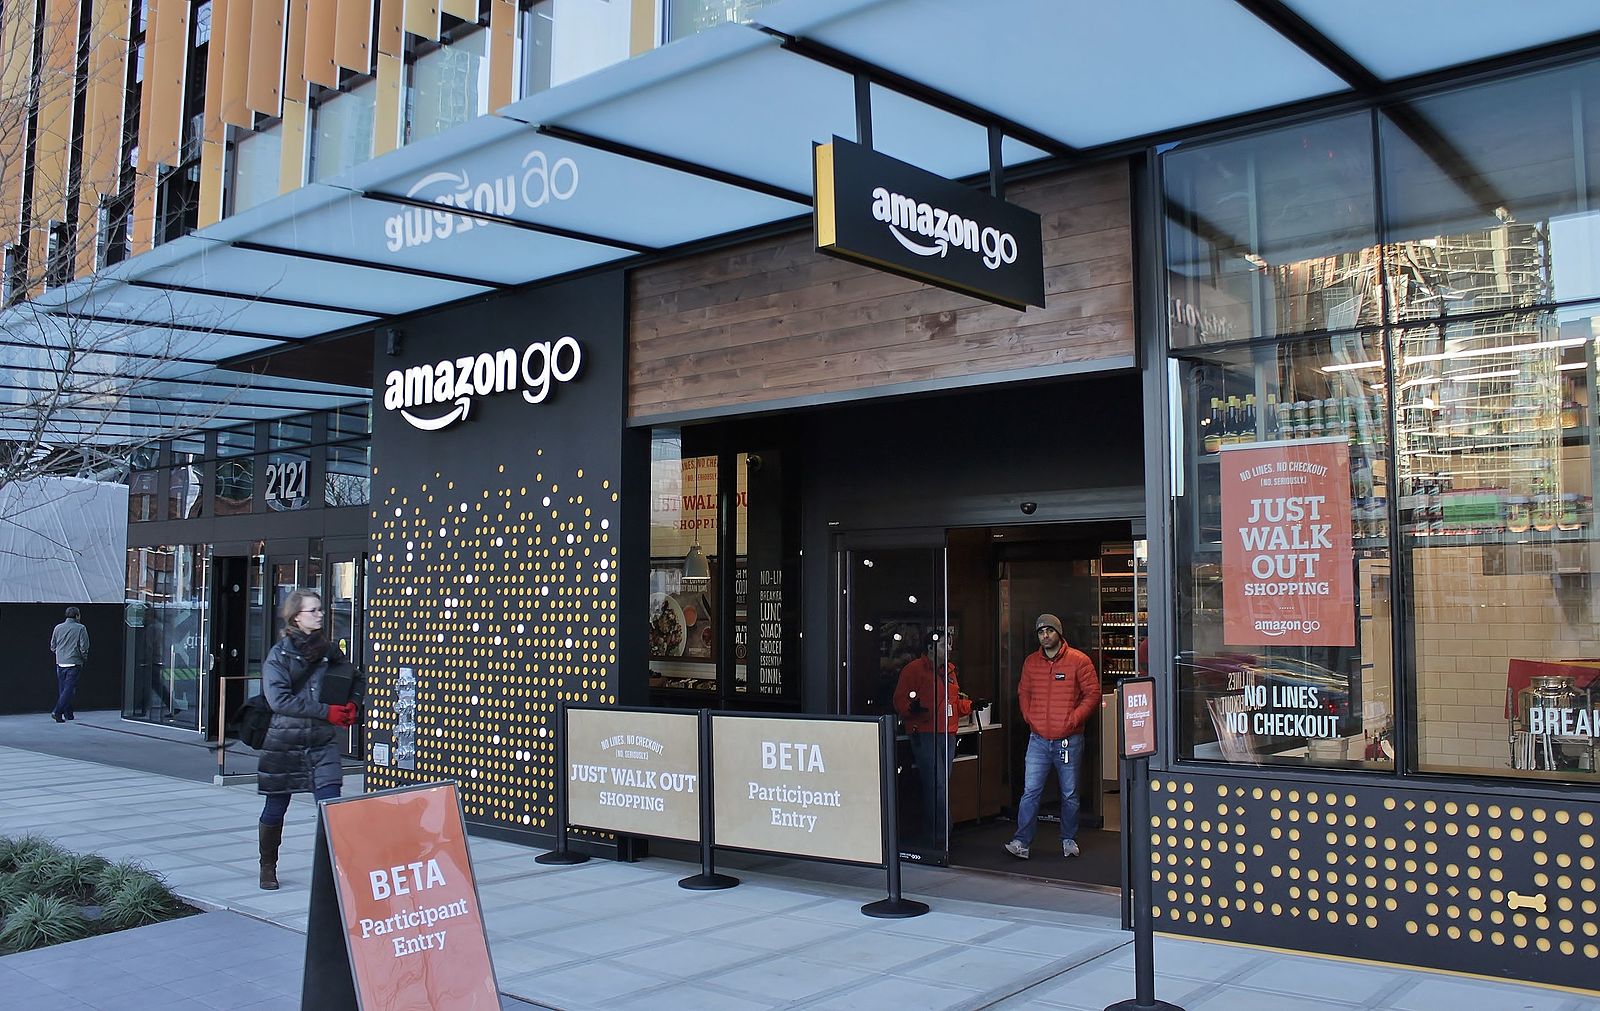 Difference Between Amazon Go and Competitors